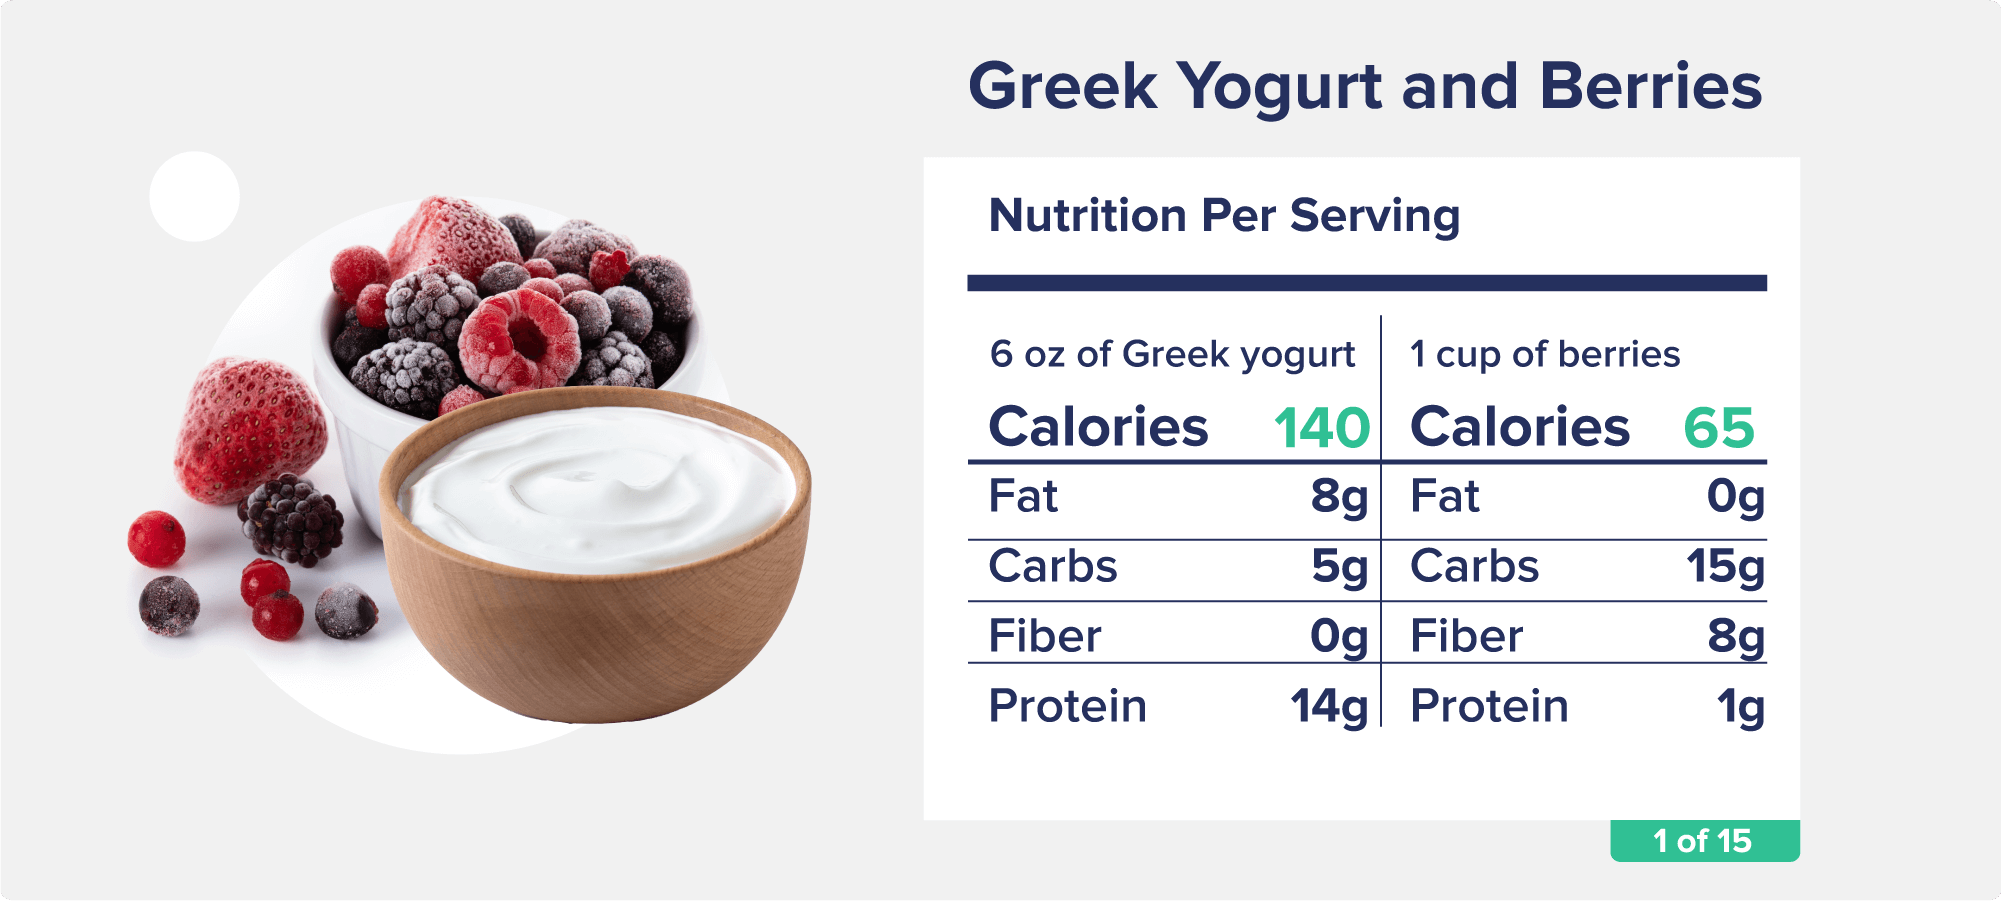 An image of Greek Yogurt and Berries with accompanying nutrition facts like calories, fat, and protein.